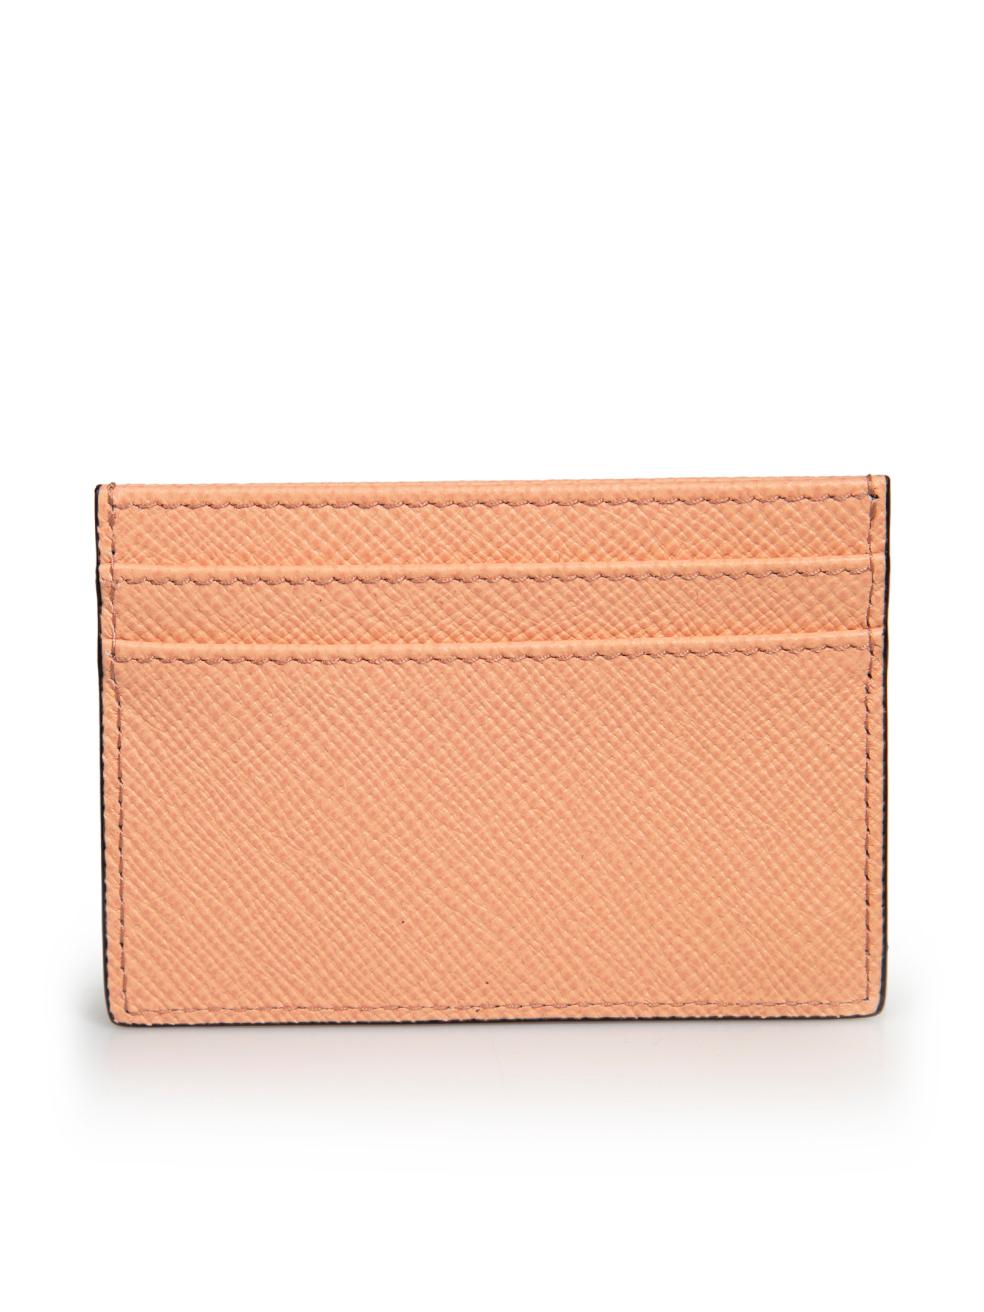 Smythson Salmon Pink Leather Cardholder In New Condition For Sale In London, GB